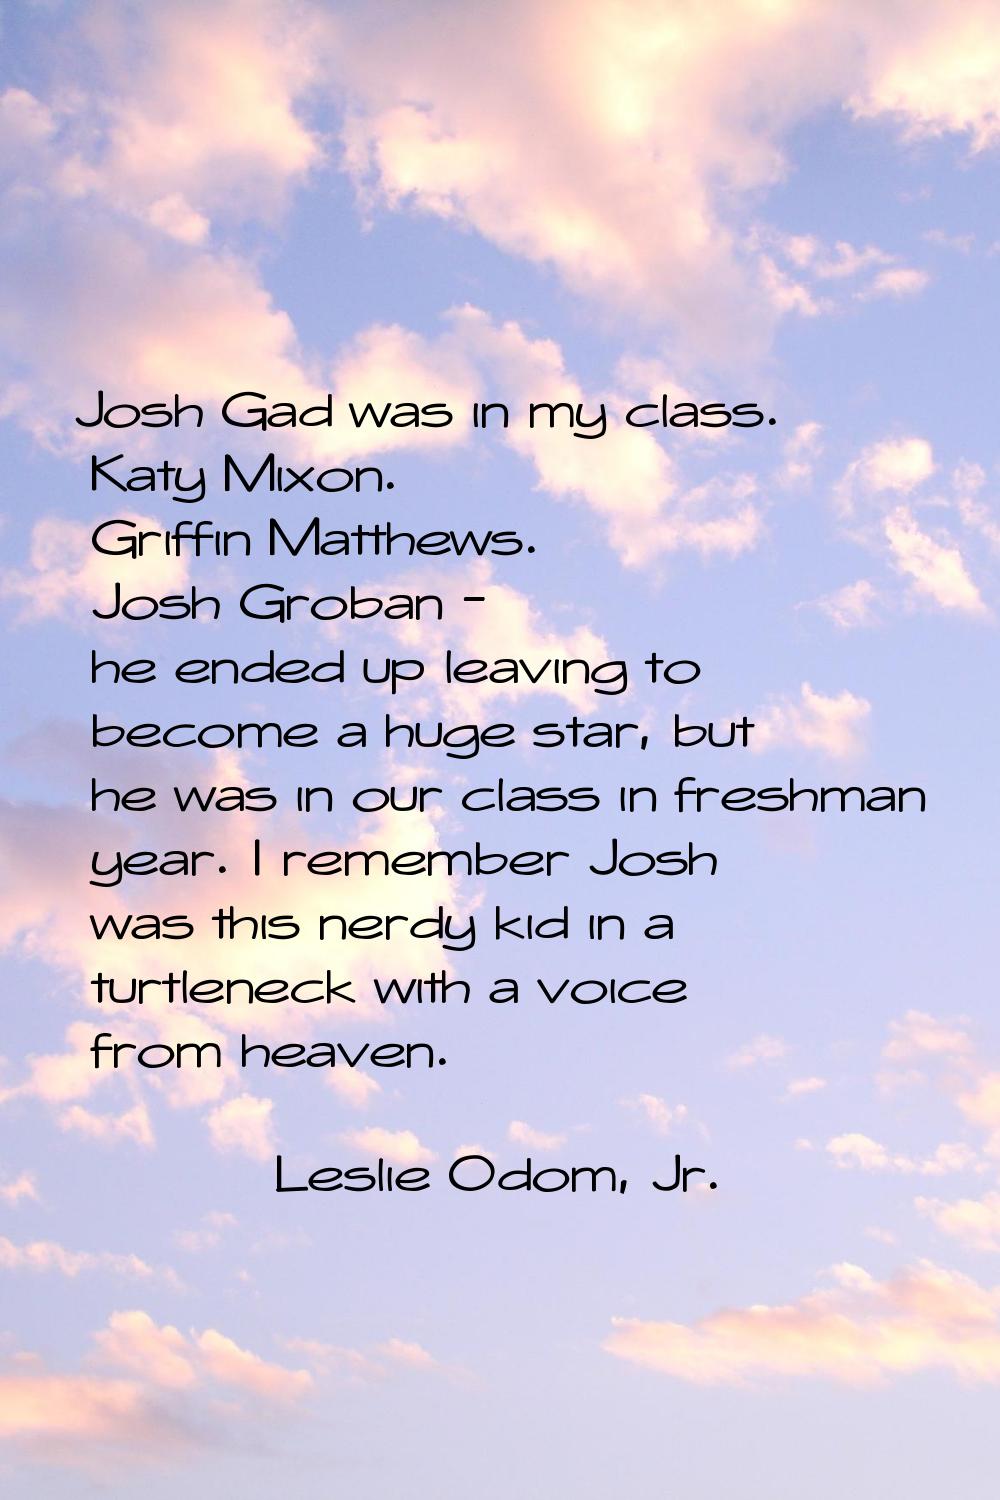 Josh Gad was in my class. Katy Mixon. Griffin Matthews. Josh Groban - he ended up leaving to become